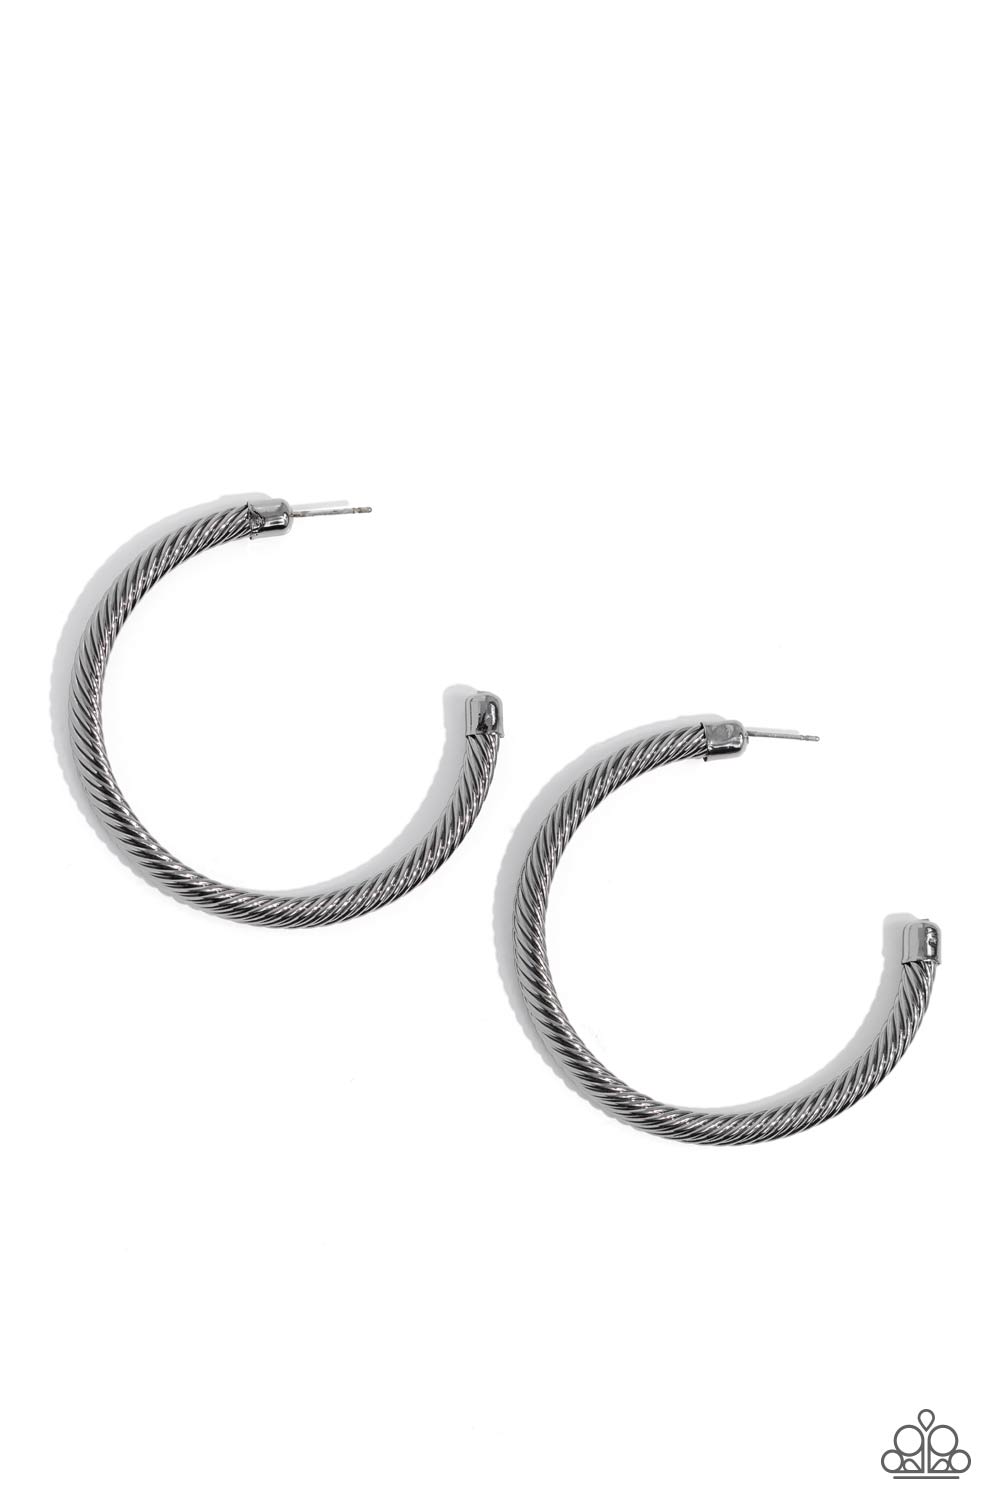 Roped in Radiance - Black Gunmetal Hoop Earrings - Paparazzi Accessories - Shimmering gunmetal spins into an oversized twisted rope as it curves into a classic thick hoop design. Earring attaches to a standard post fitting. Hoop measures approximately 2" in diameter. Sold as one pair of hoop earrings.